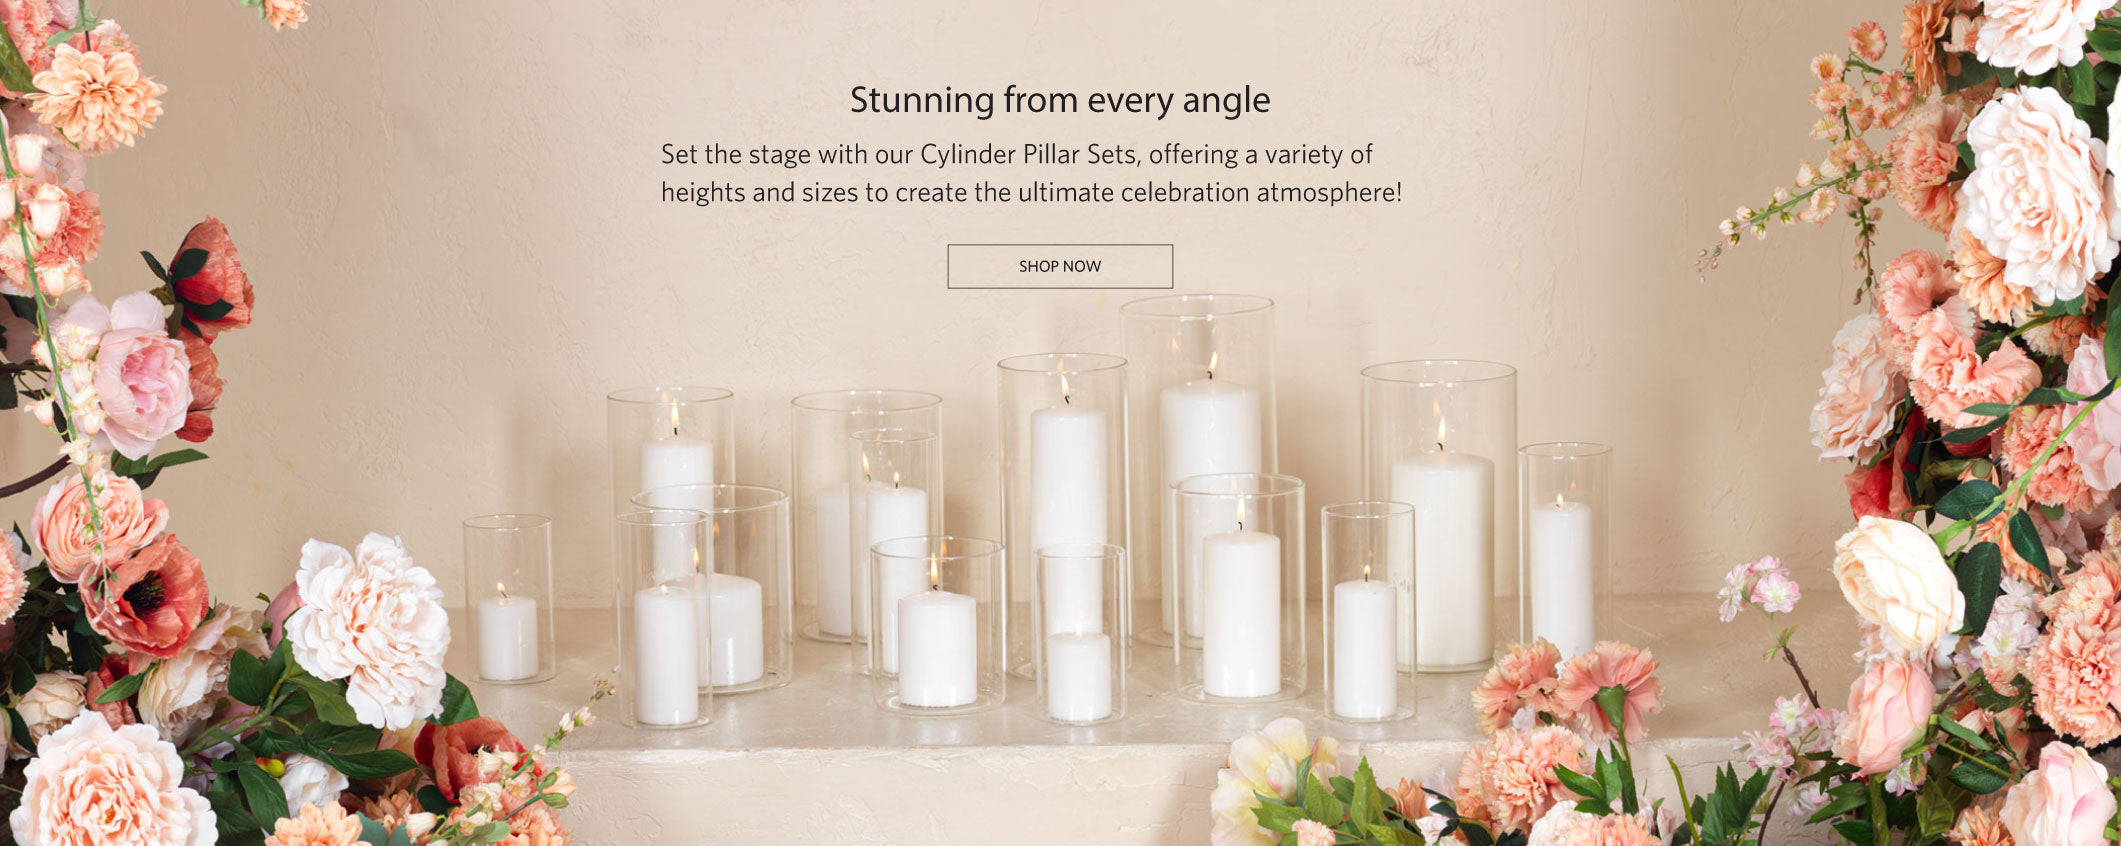 Large selection of Wedding table candle centeroiece sets